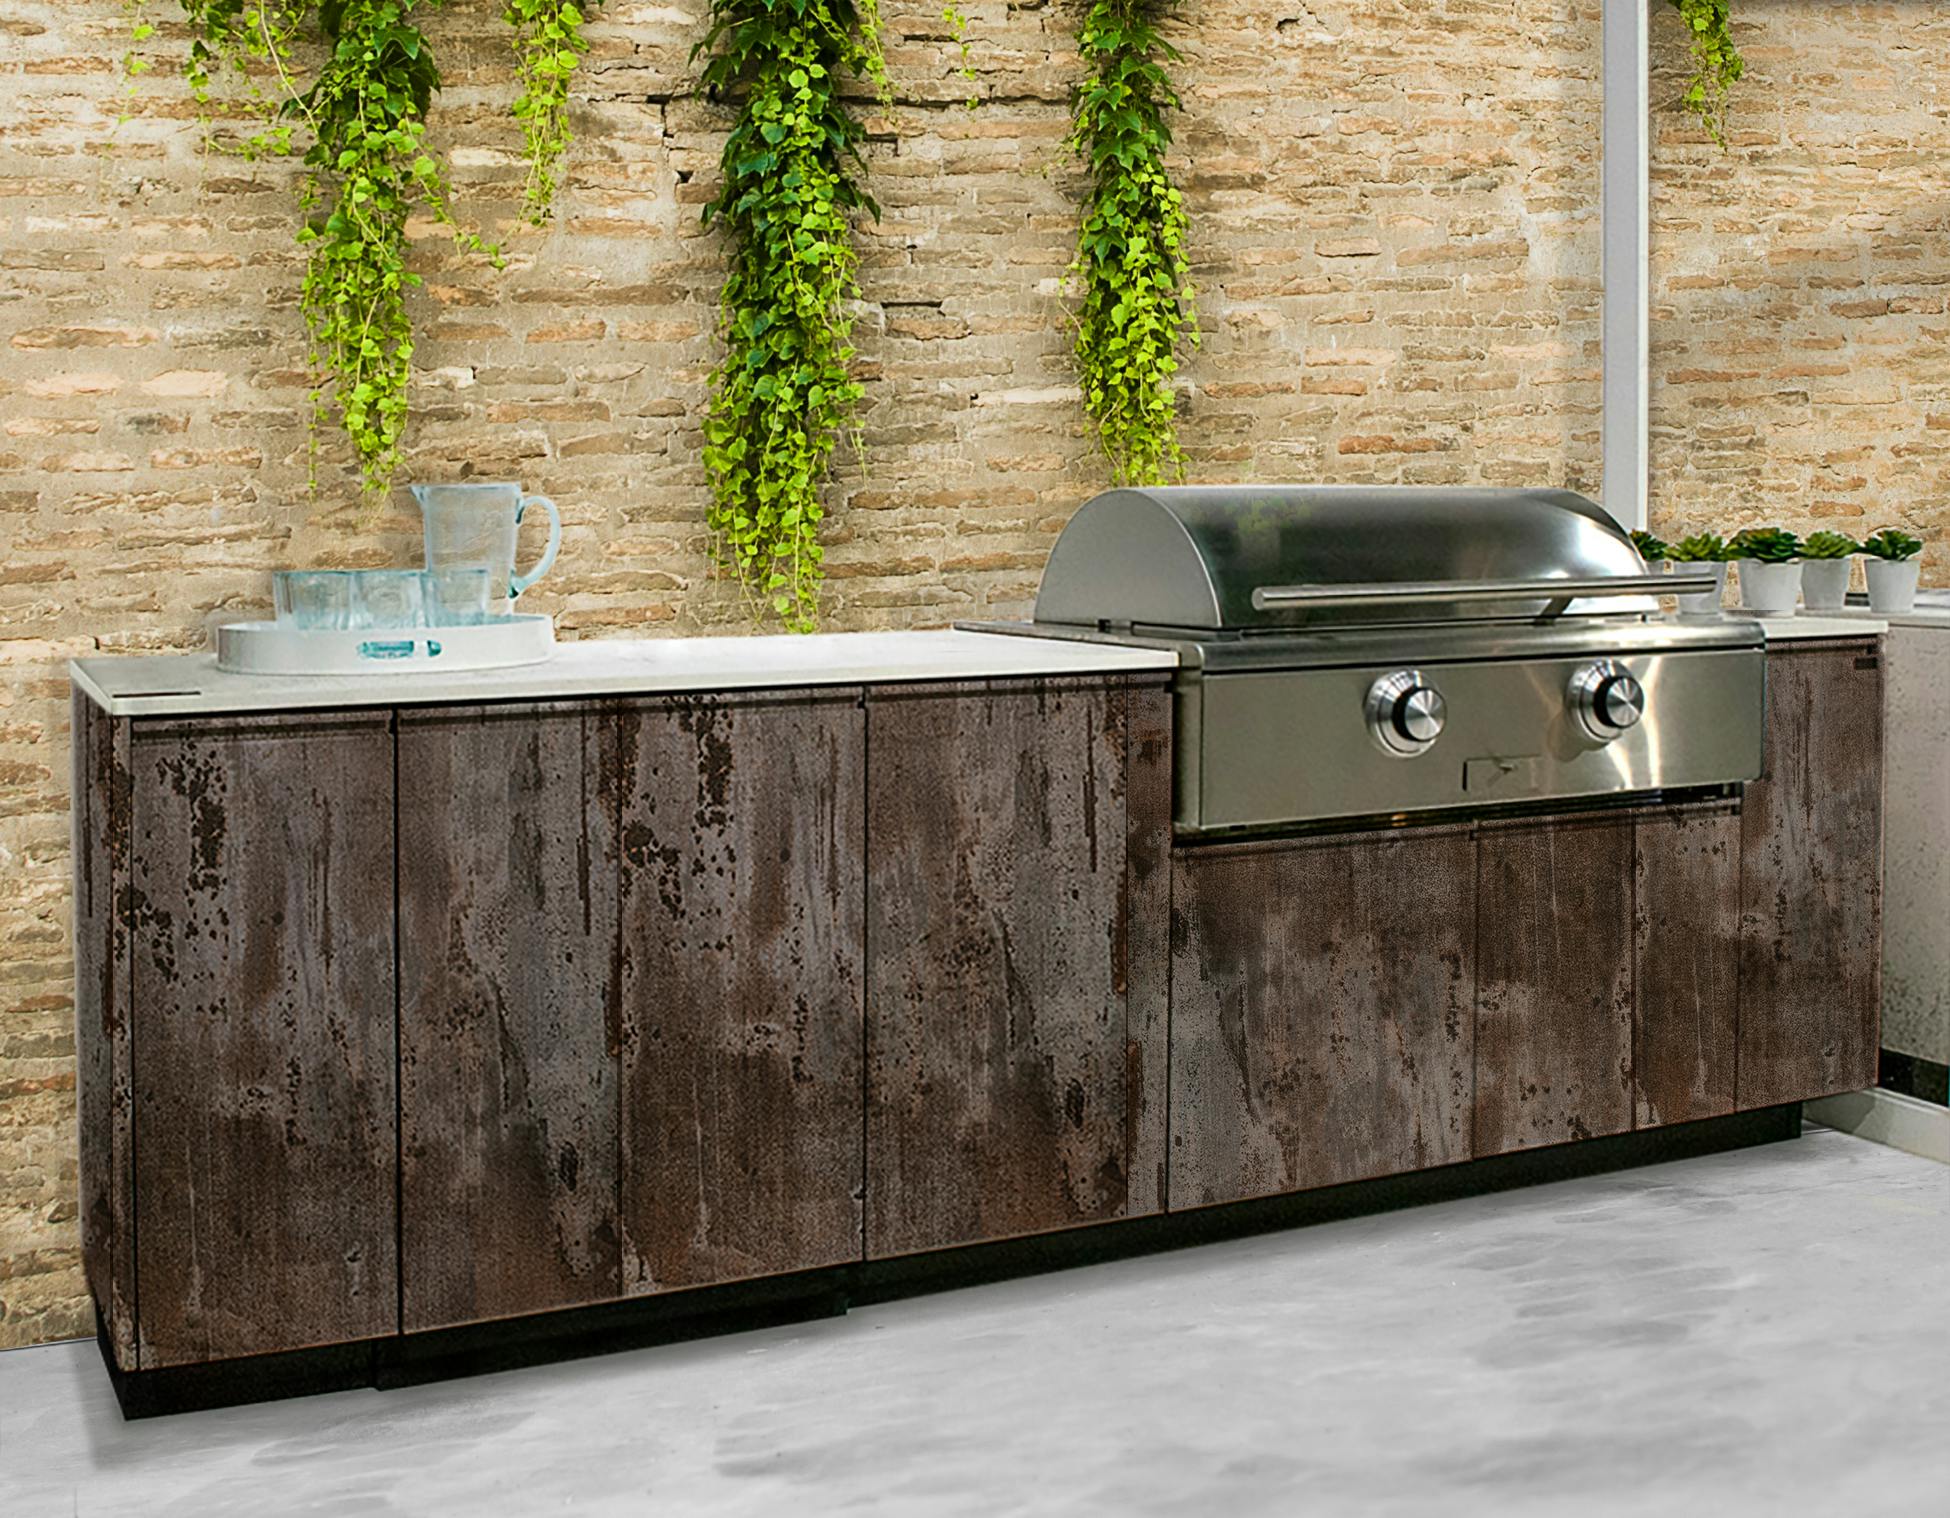 Image number 32 of the current section of Brown Jordan Outdoor Kitchens and Dekton by Cosentino Debut Elements by TECNO by Daniel Germani at ICFF 2019 - Booth #2547 of Cosentino USA